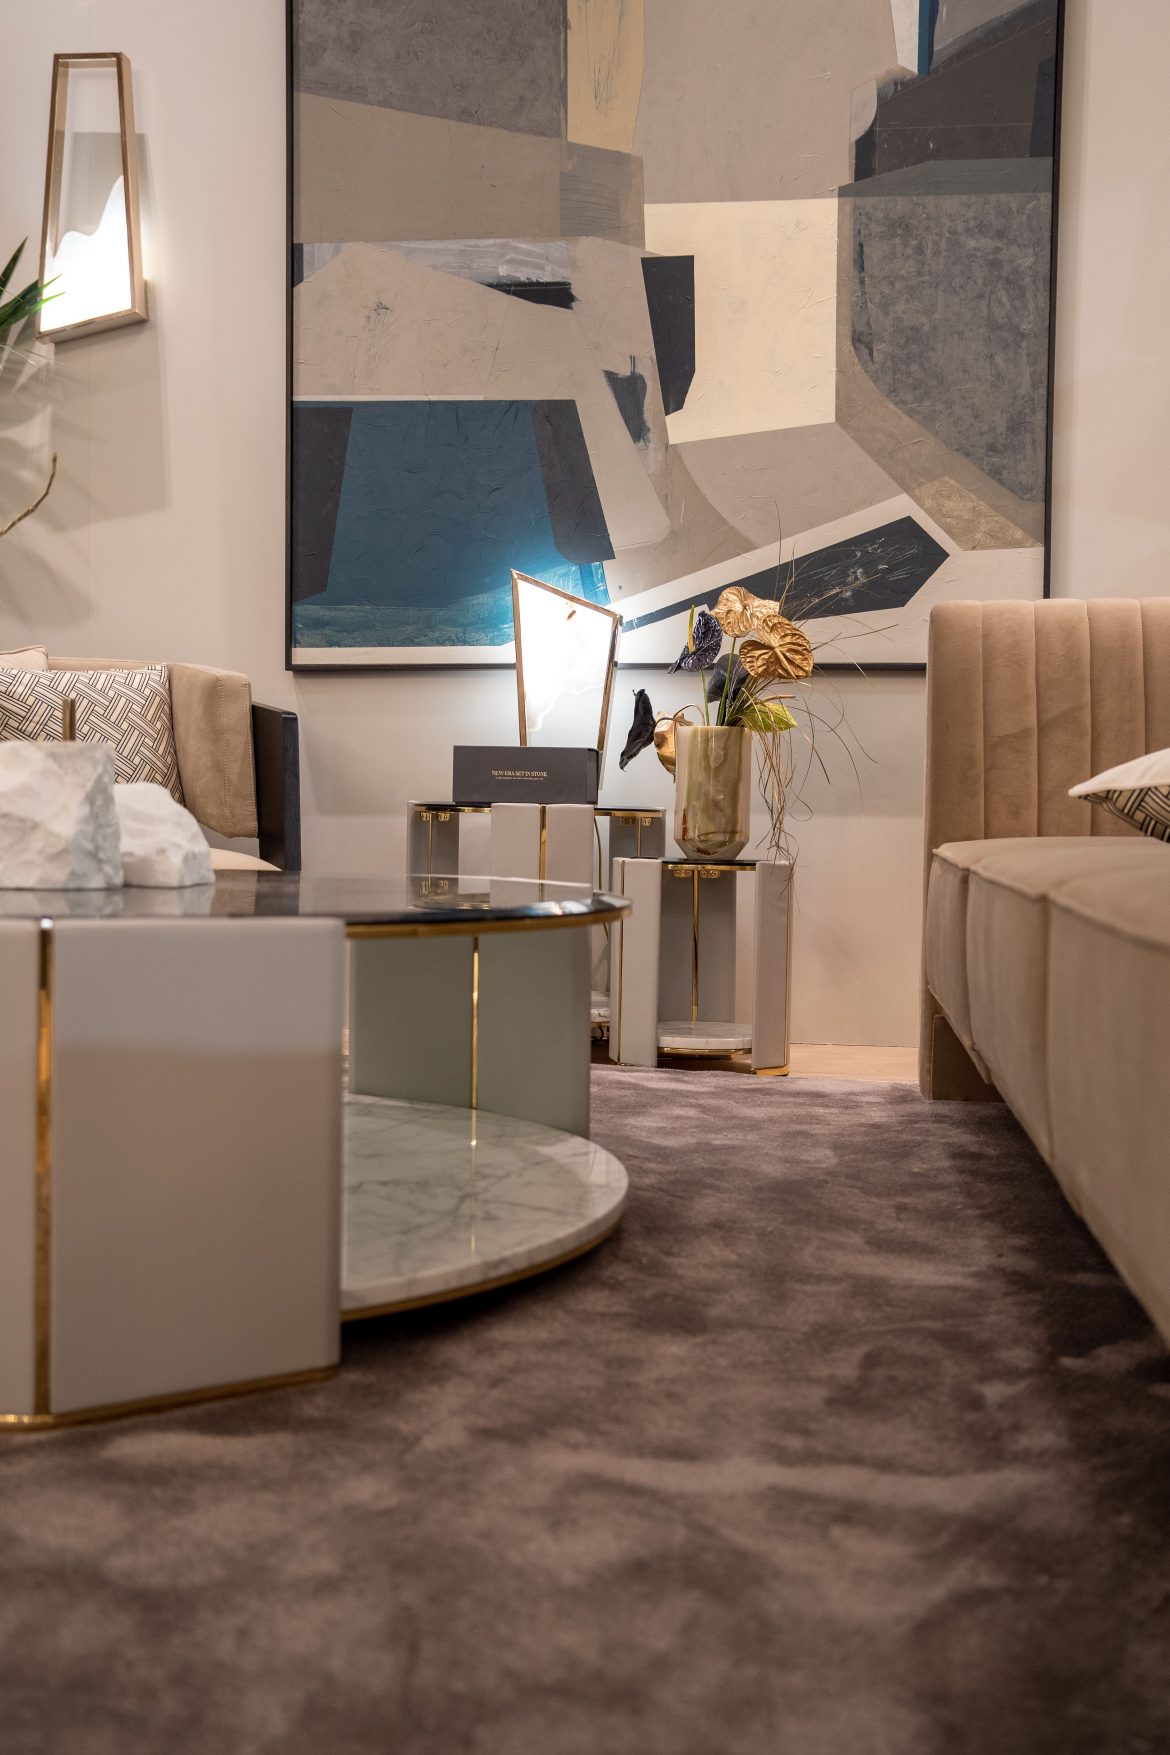 Postcard From Salone Del Mobile: A Luxurious Living Room